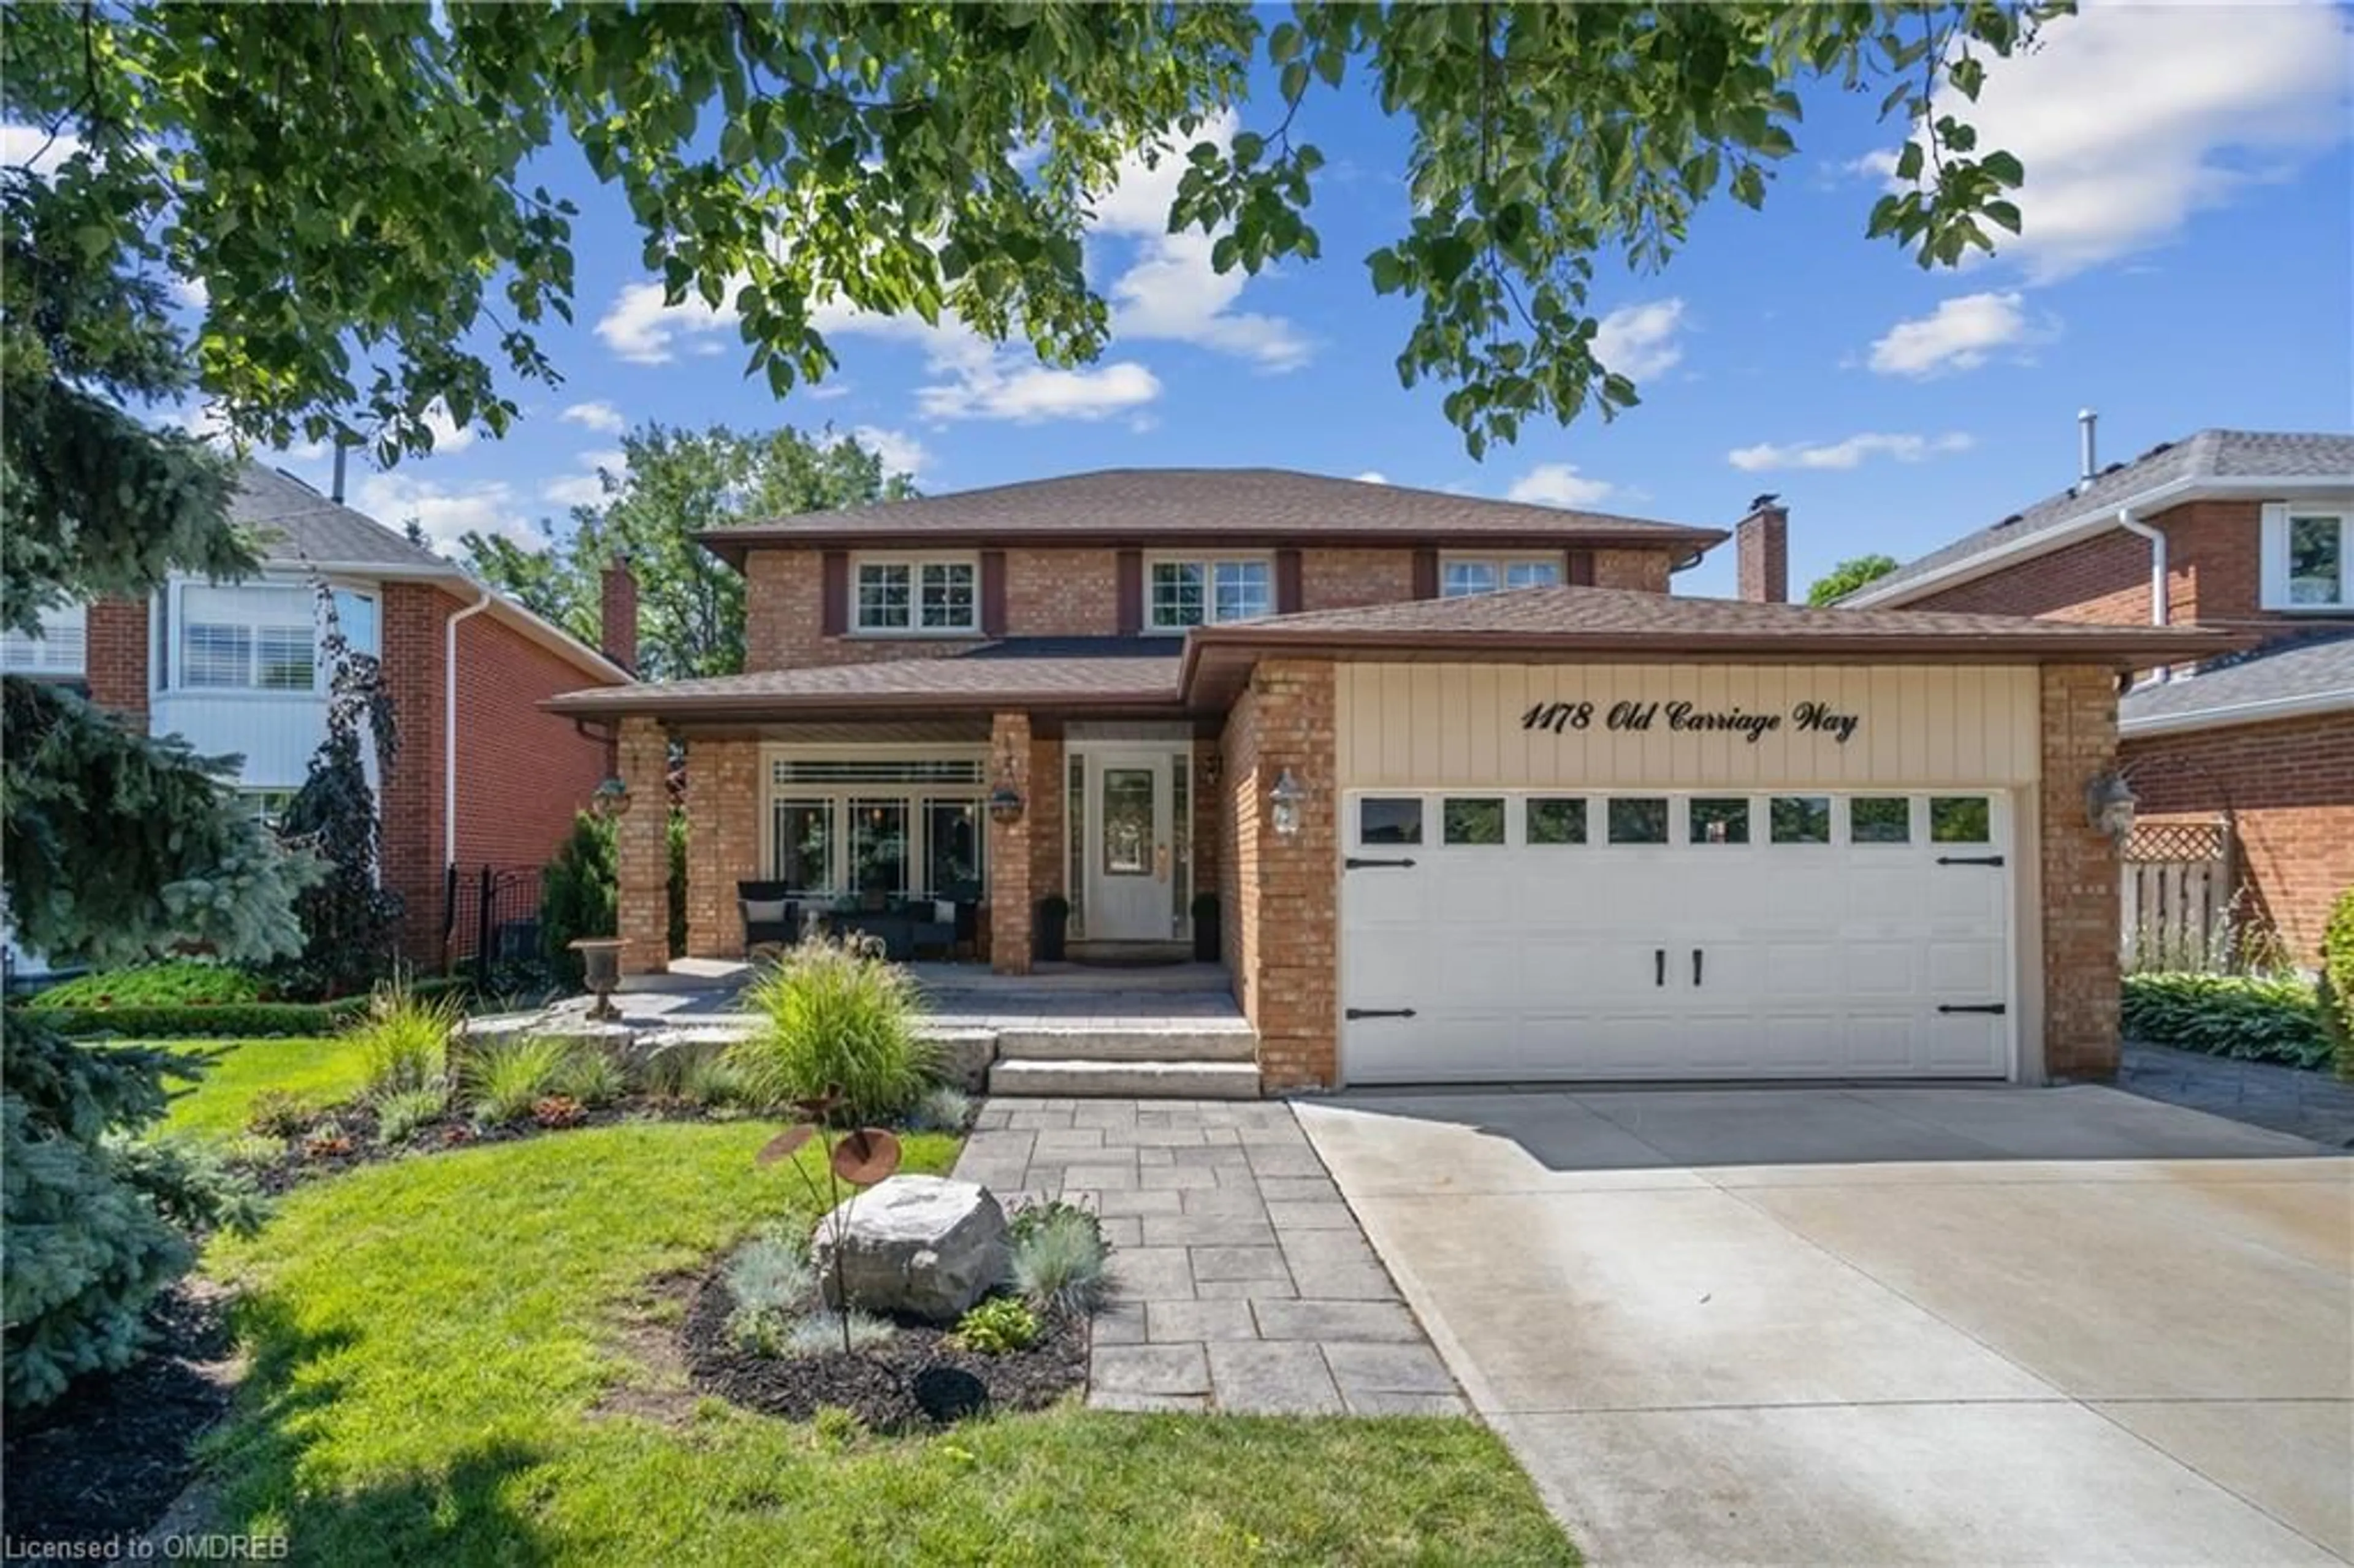 Home with brick exterior material for 1178 Old Carriage Way, Oakville Ontario L6M 2E1